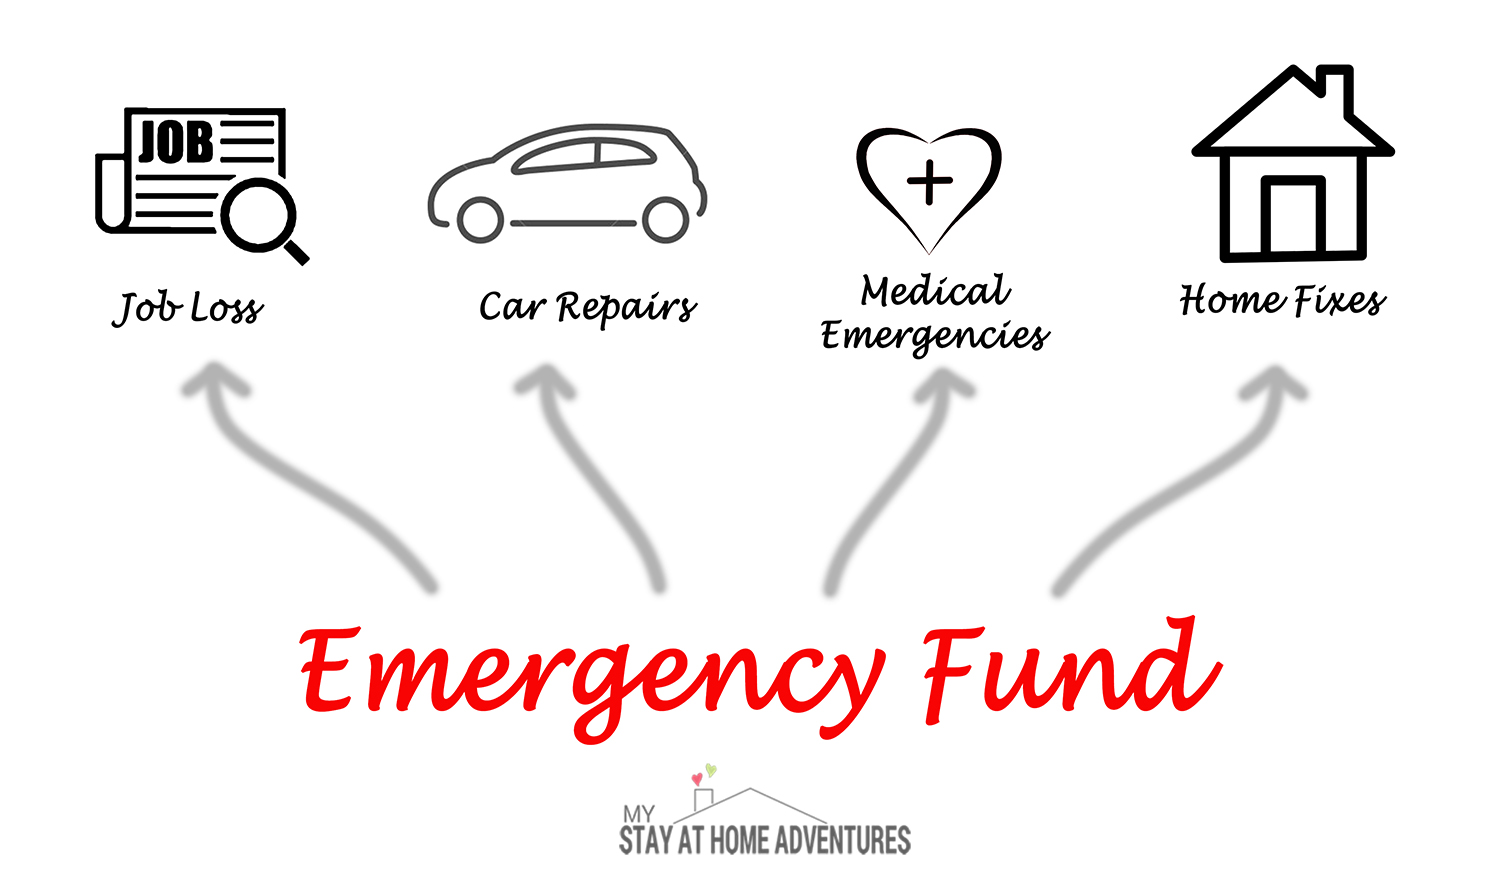 What are emergency funds for